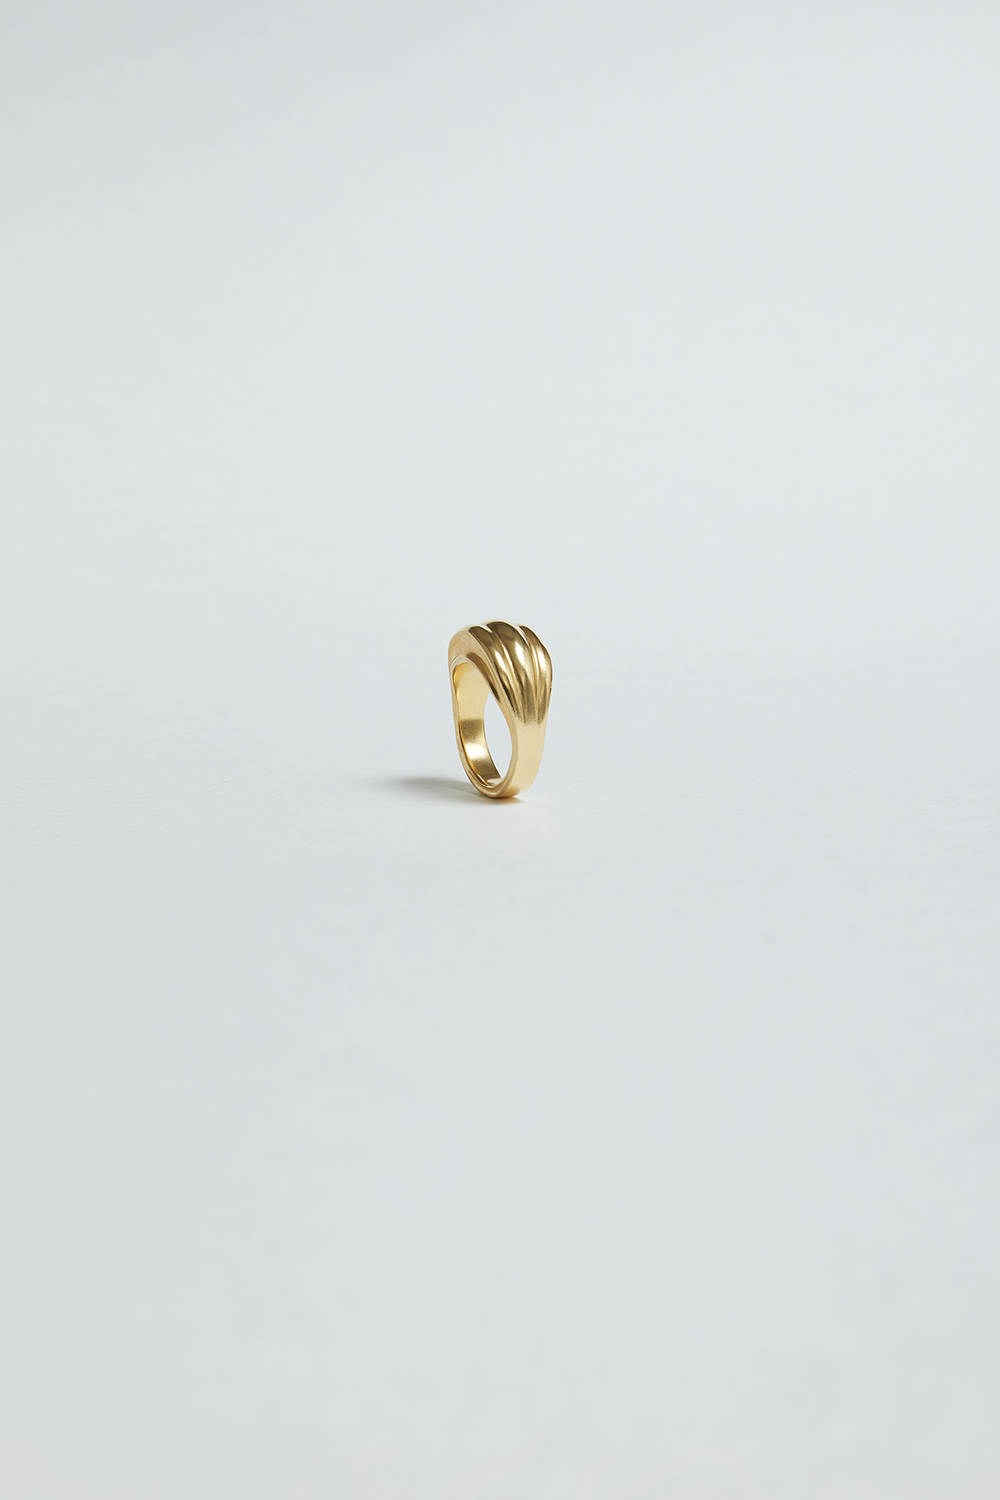 Alsace Gold Ring